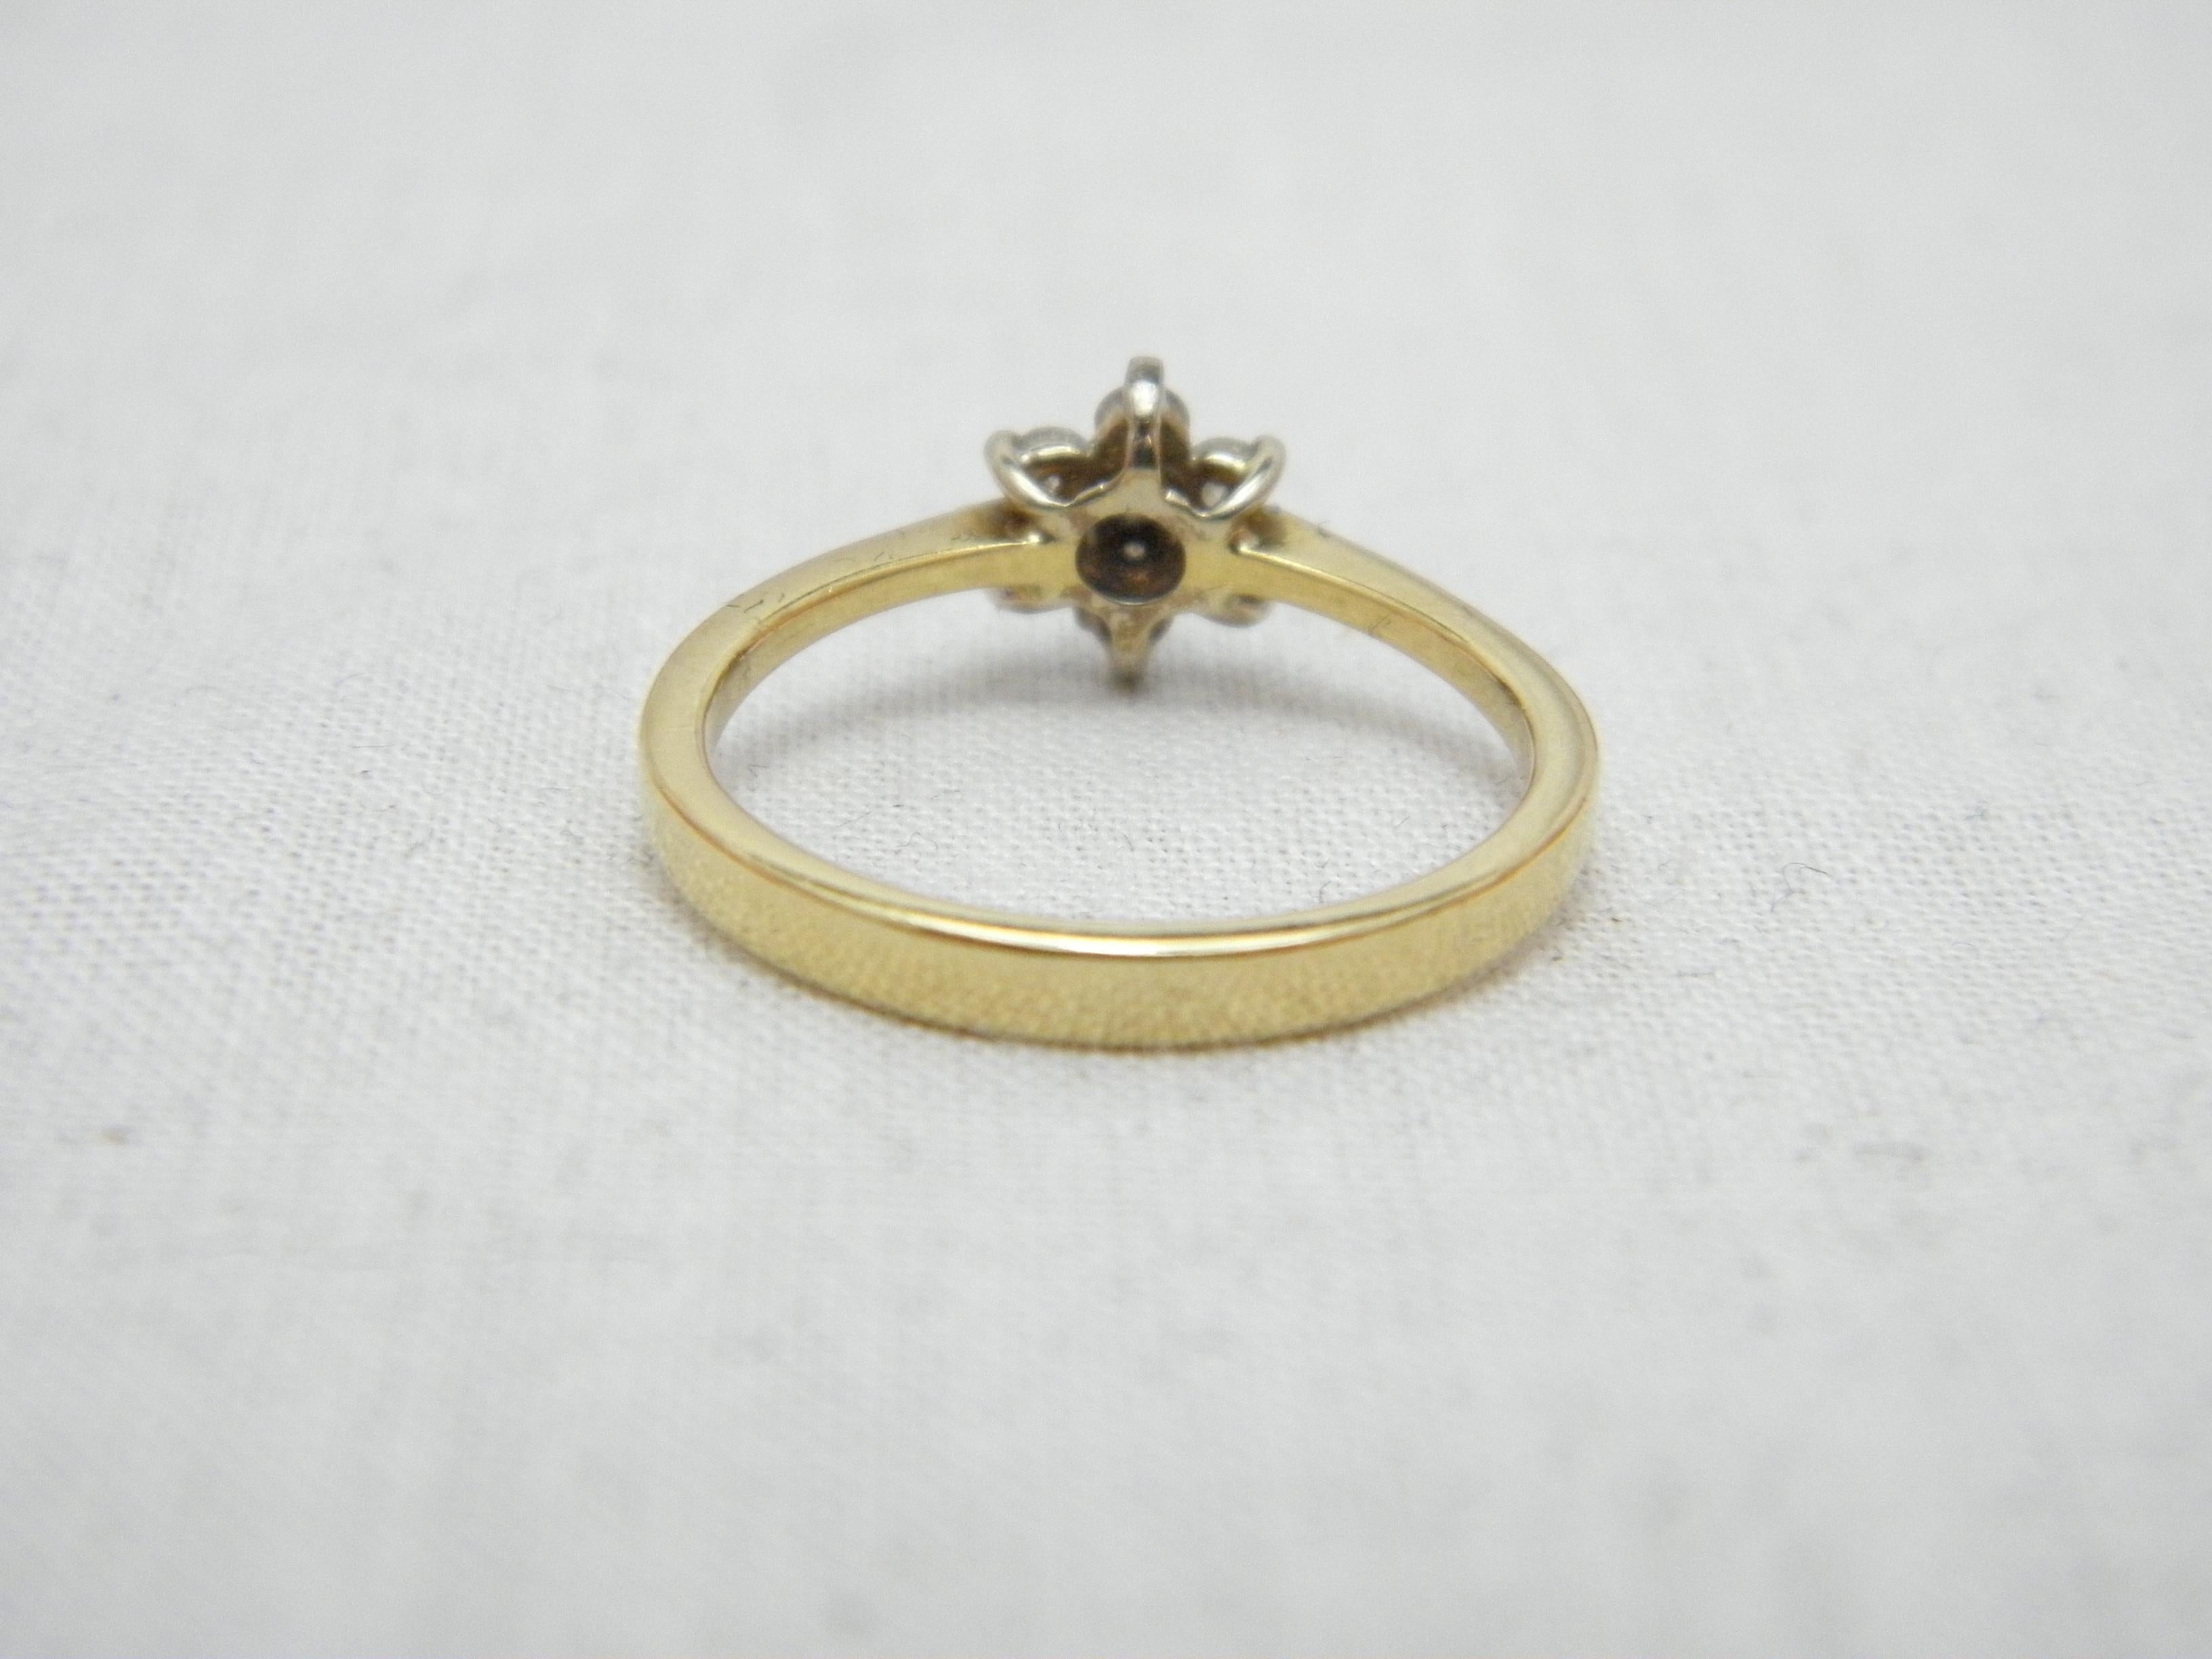 Vintage 18ct Gold 0.64 cttw Diamond Cluster Engagement Ring Size K 5.25 750 In Excellent Condition For Sale In Camelford, GB